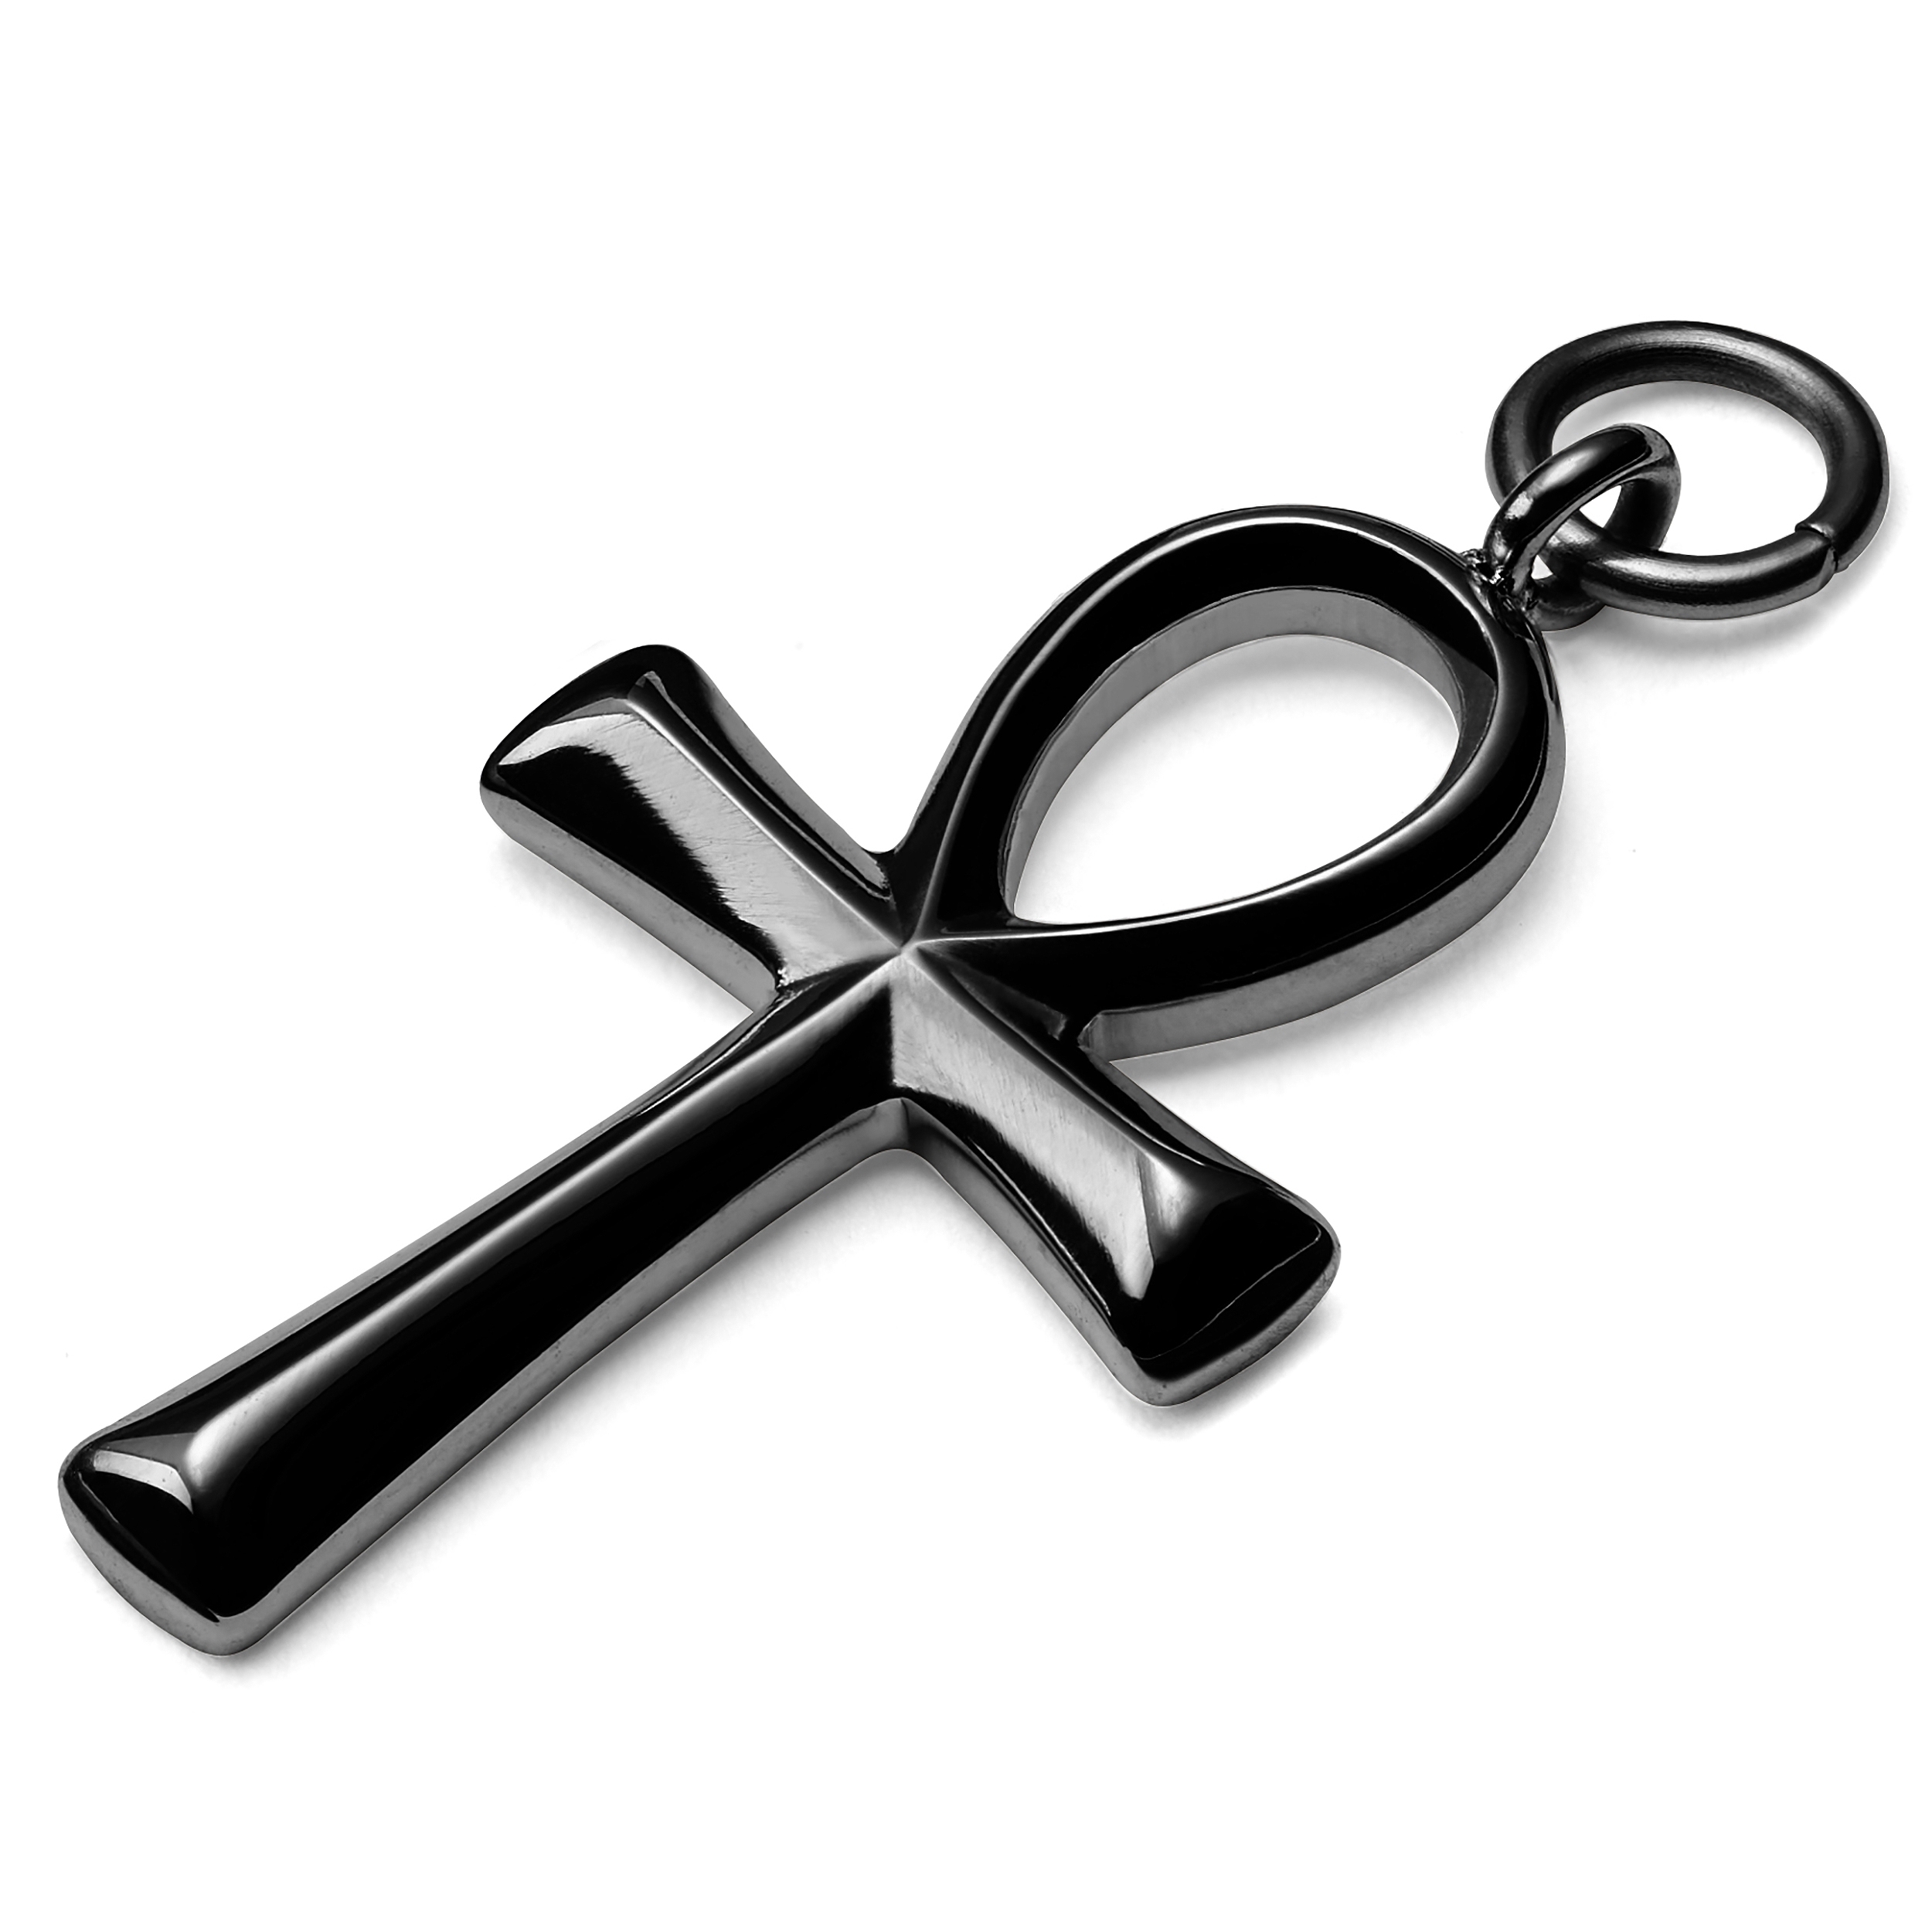 Working as Designed - Can't Craft Ankh Charm